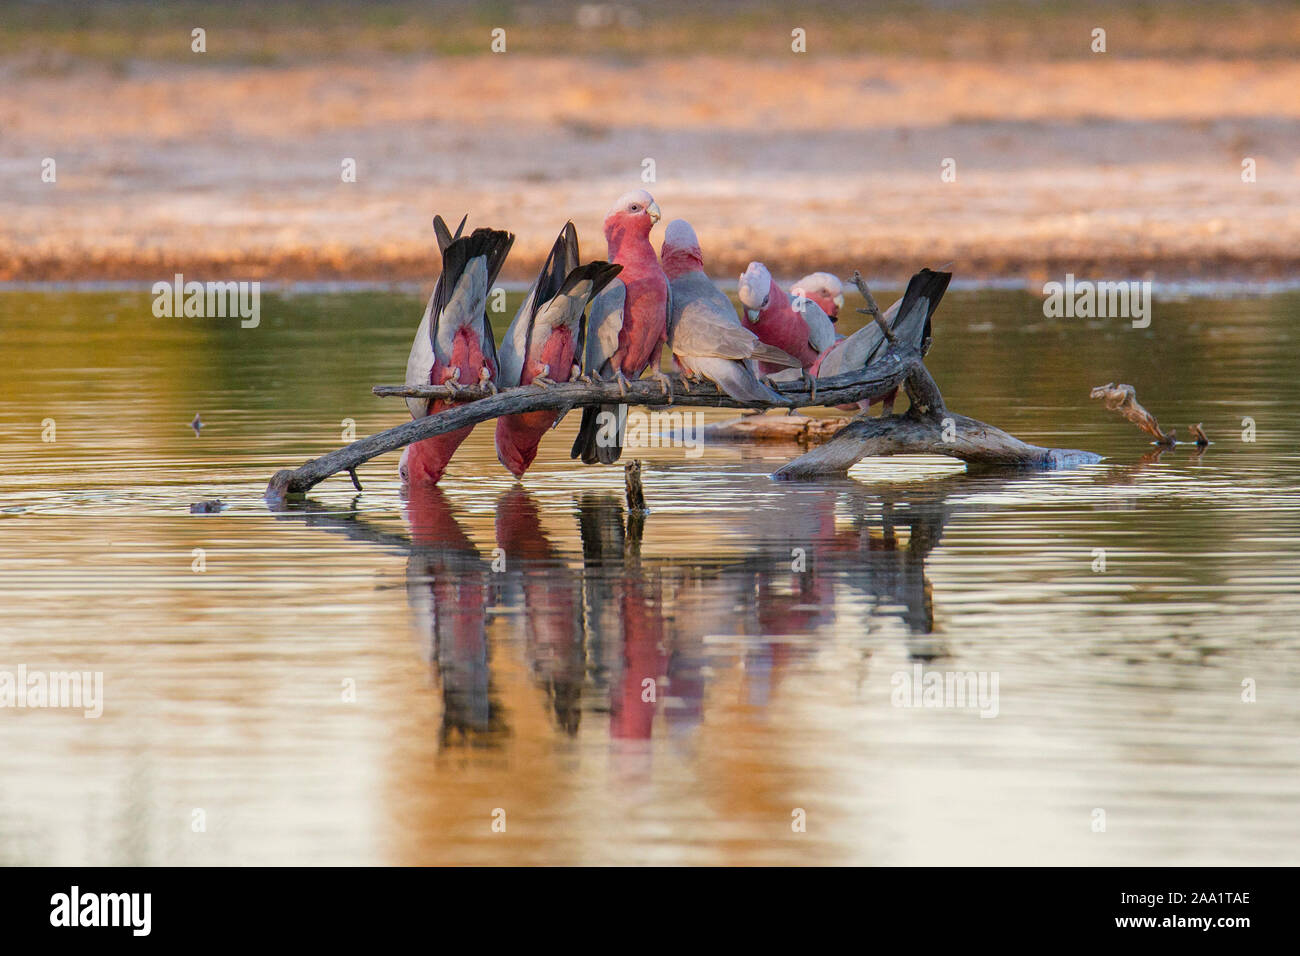 Flock of Galahs (Eolophus roseicapilla) drinking at a wetland in outback Australia Stock Photo